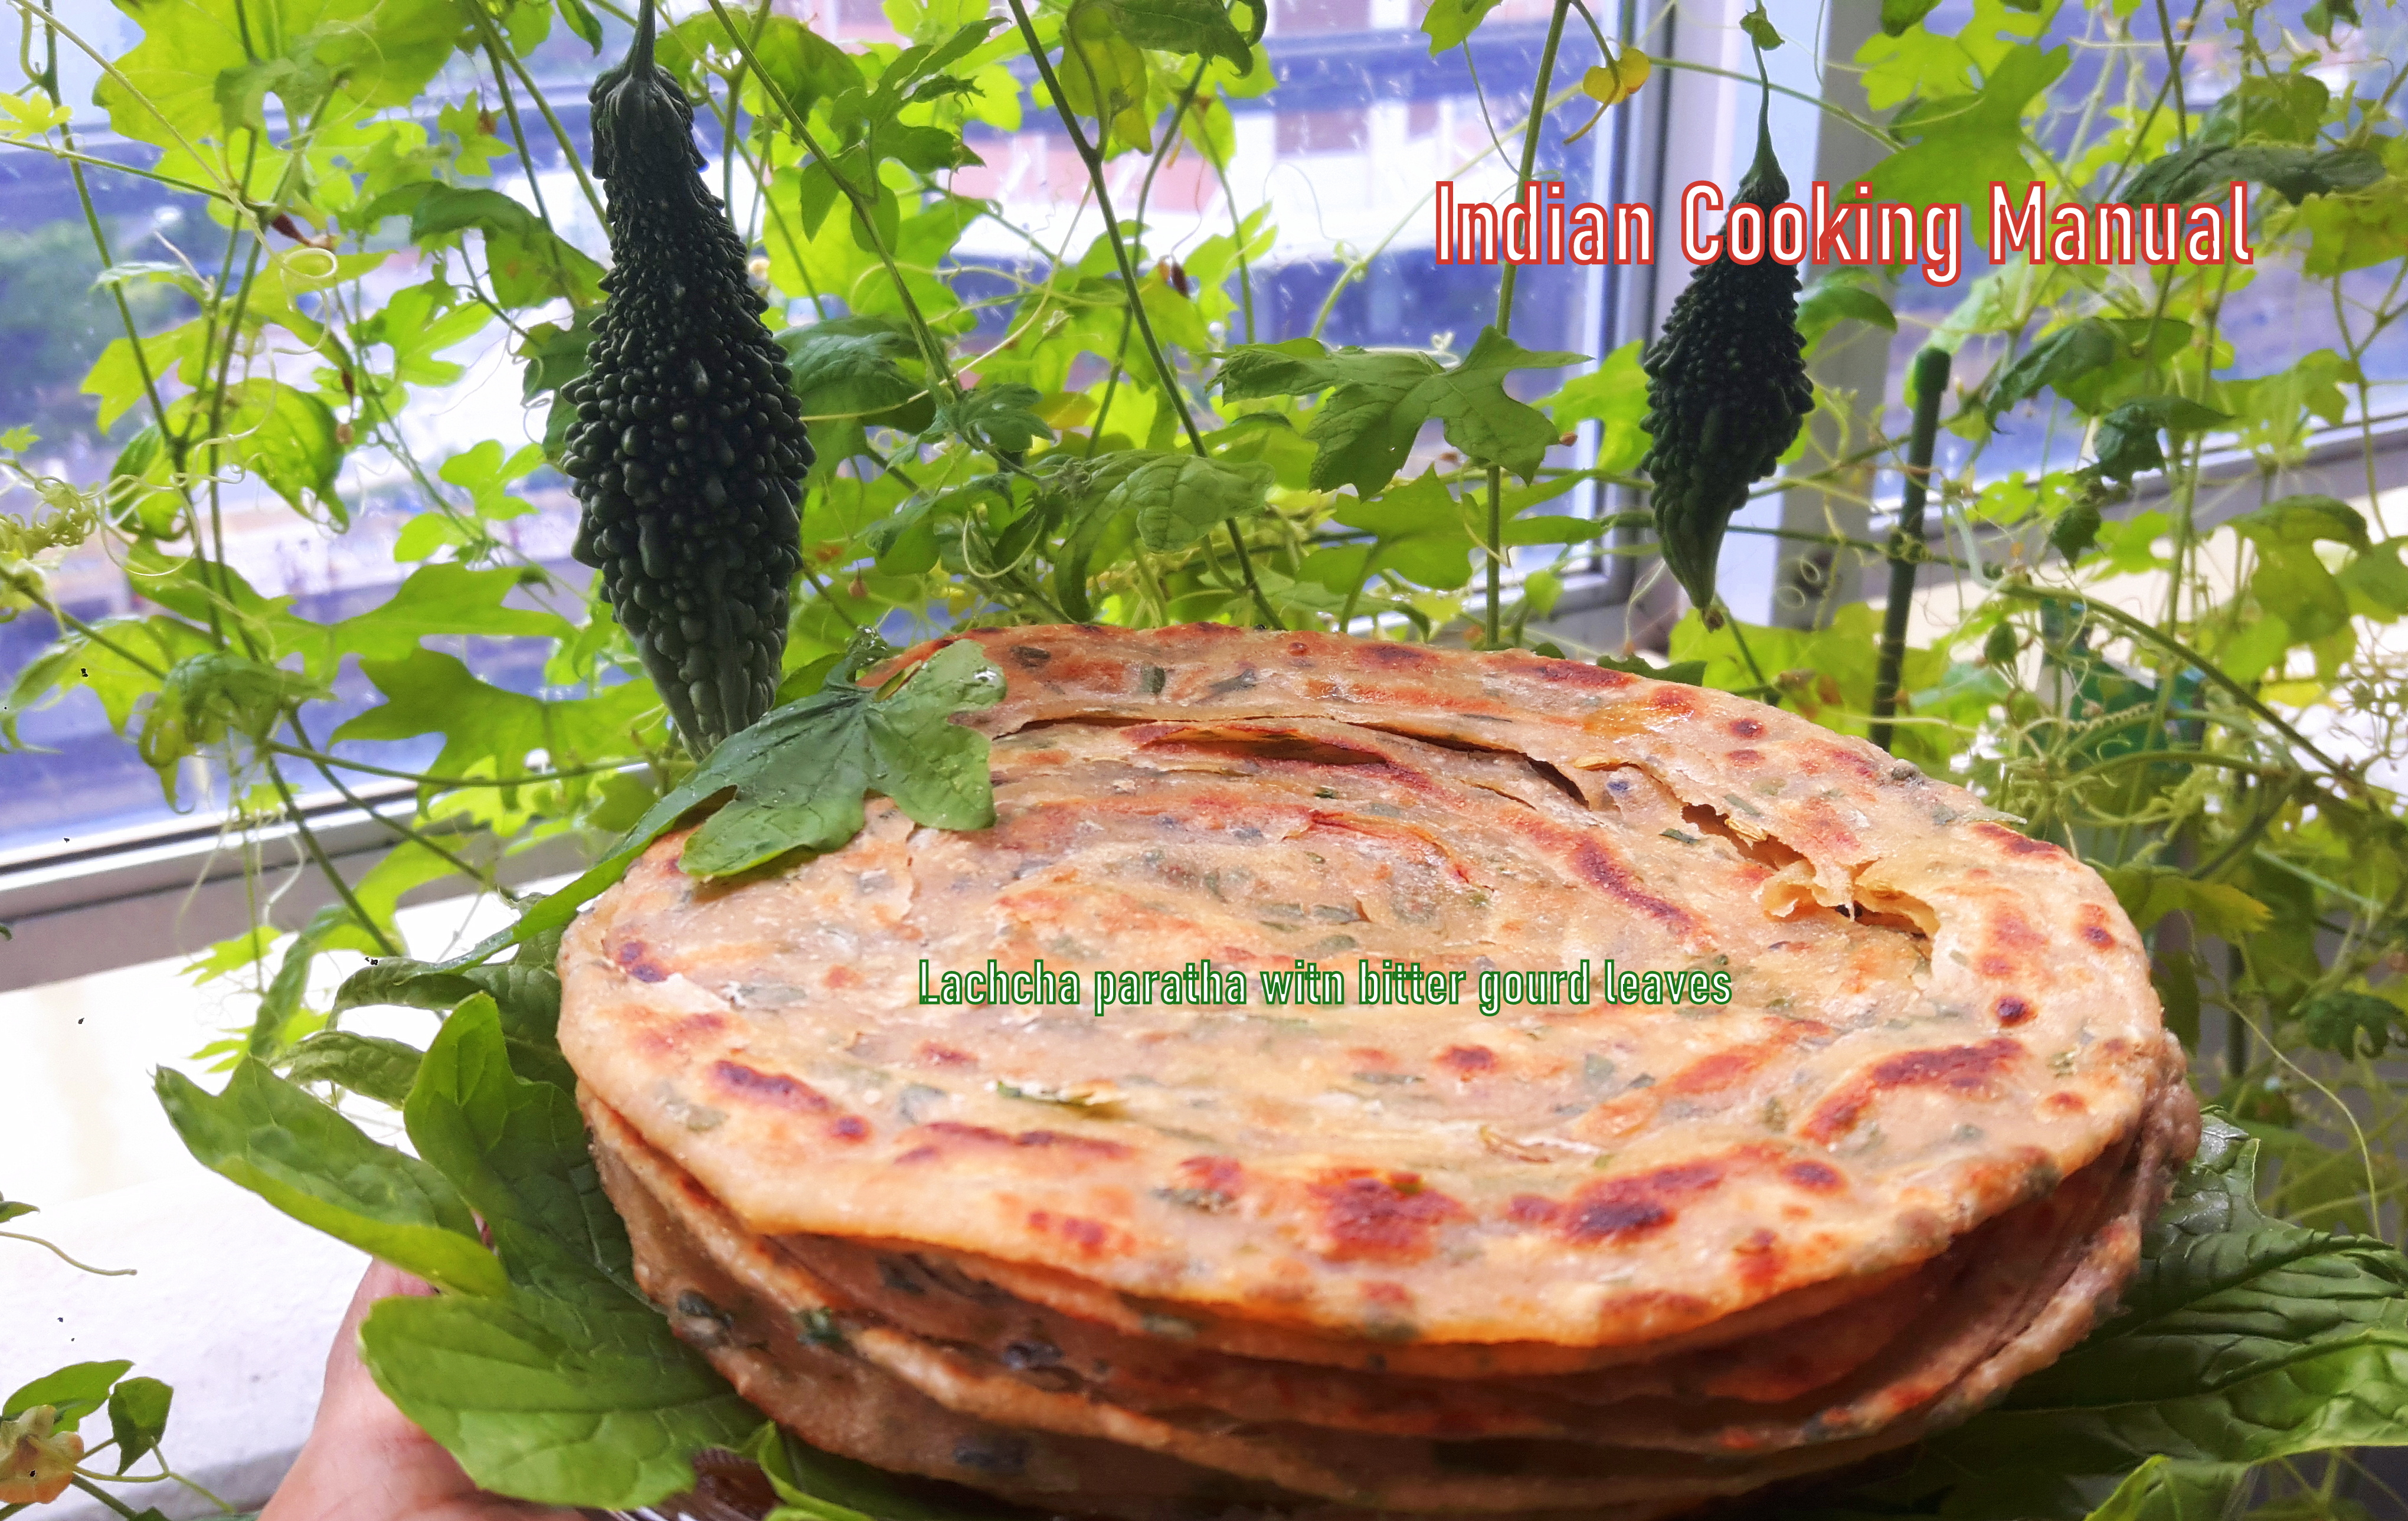 Lachchha paratha with karela leaves (layered paratha with bitter gourd leaf)